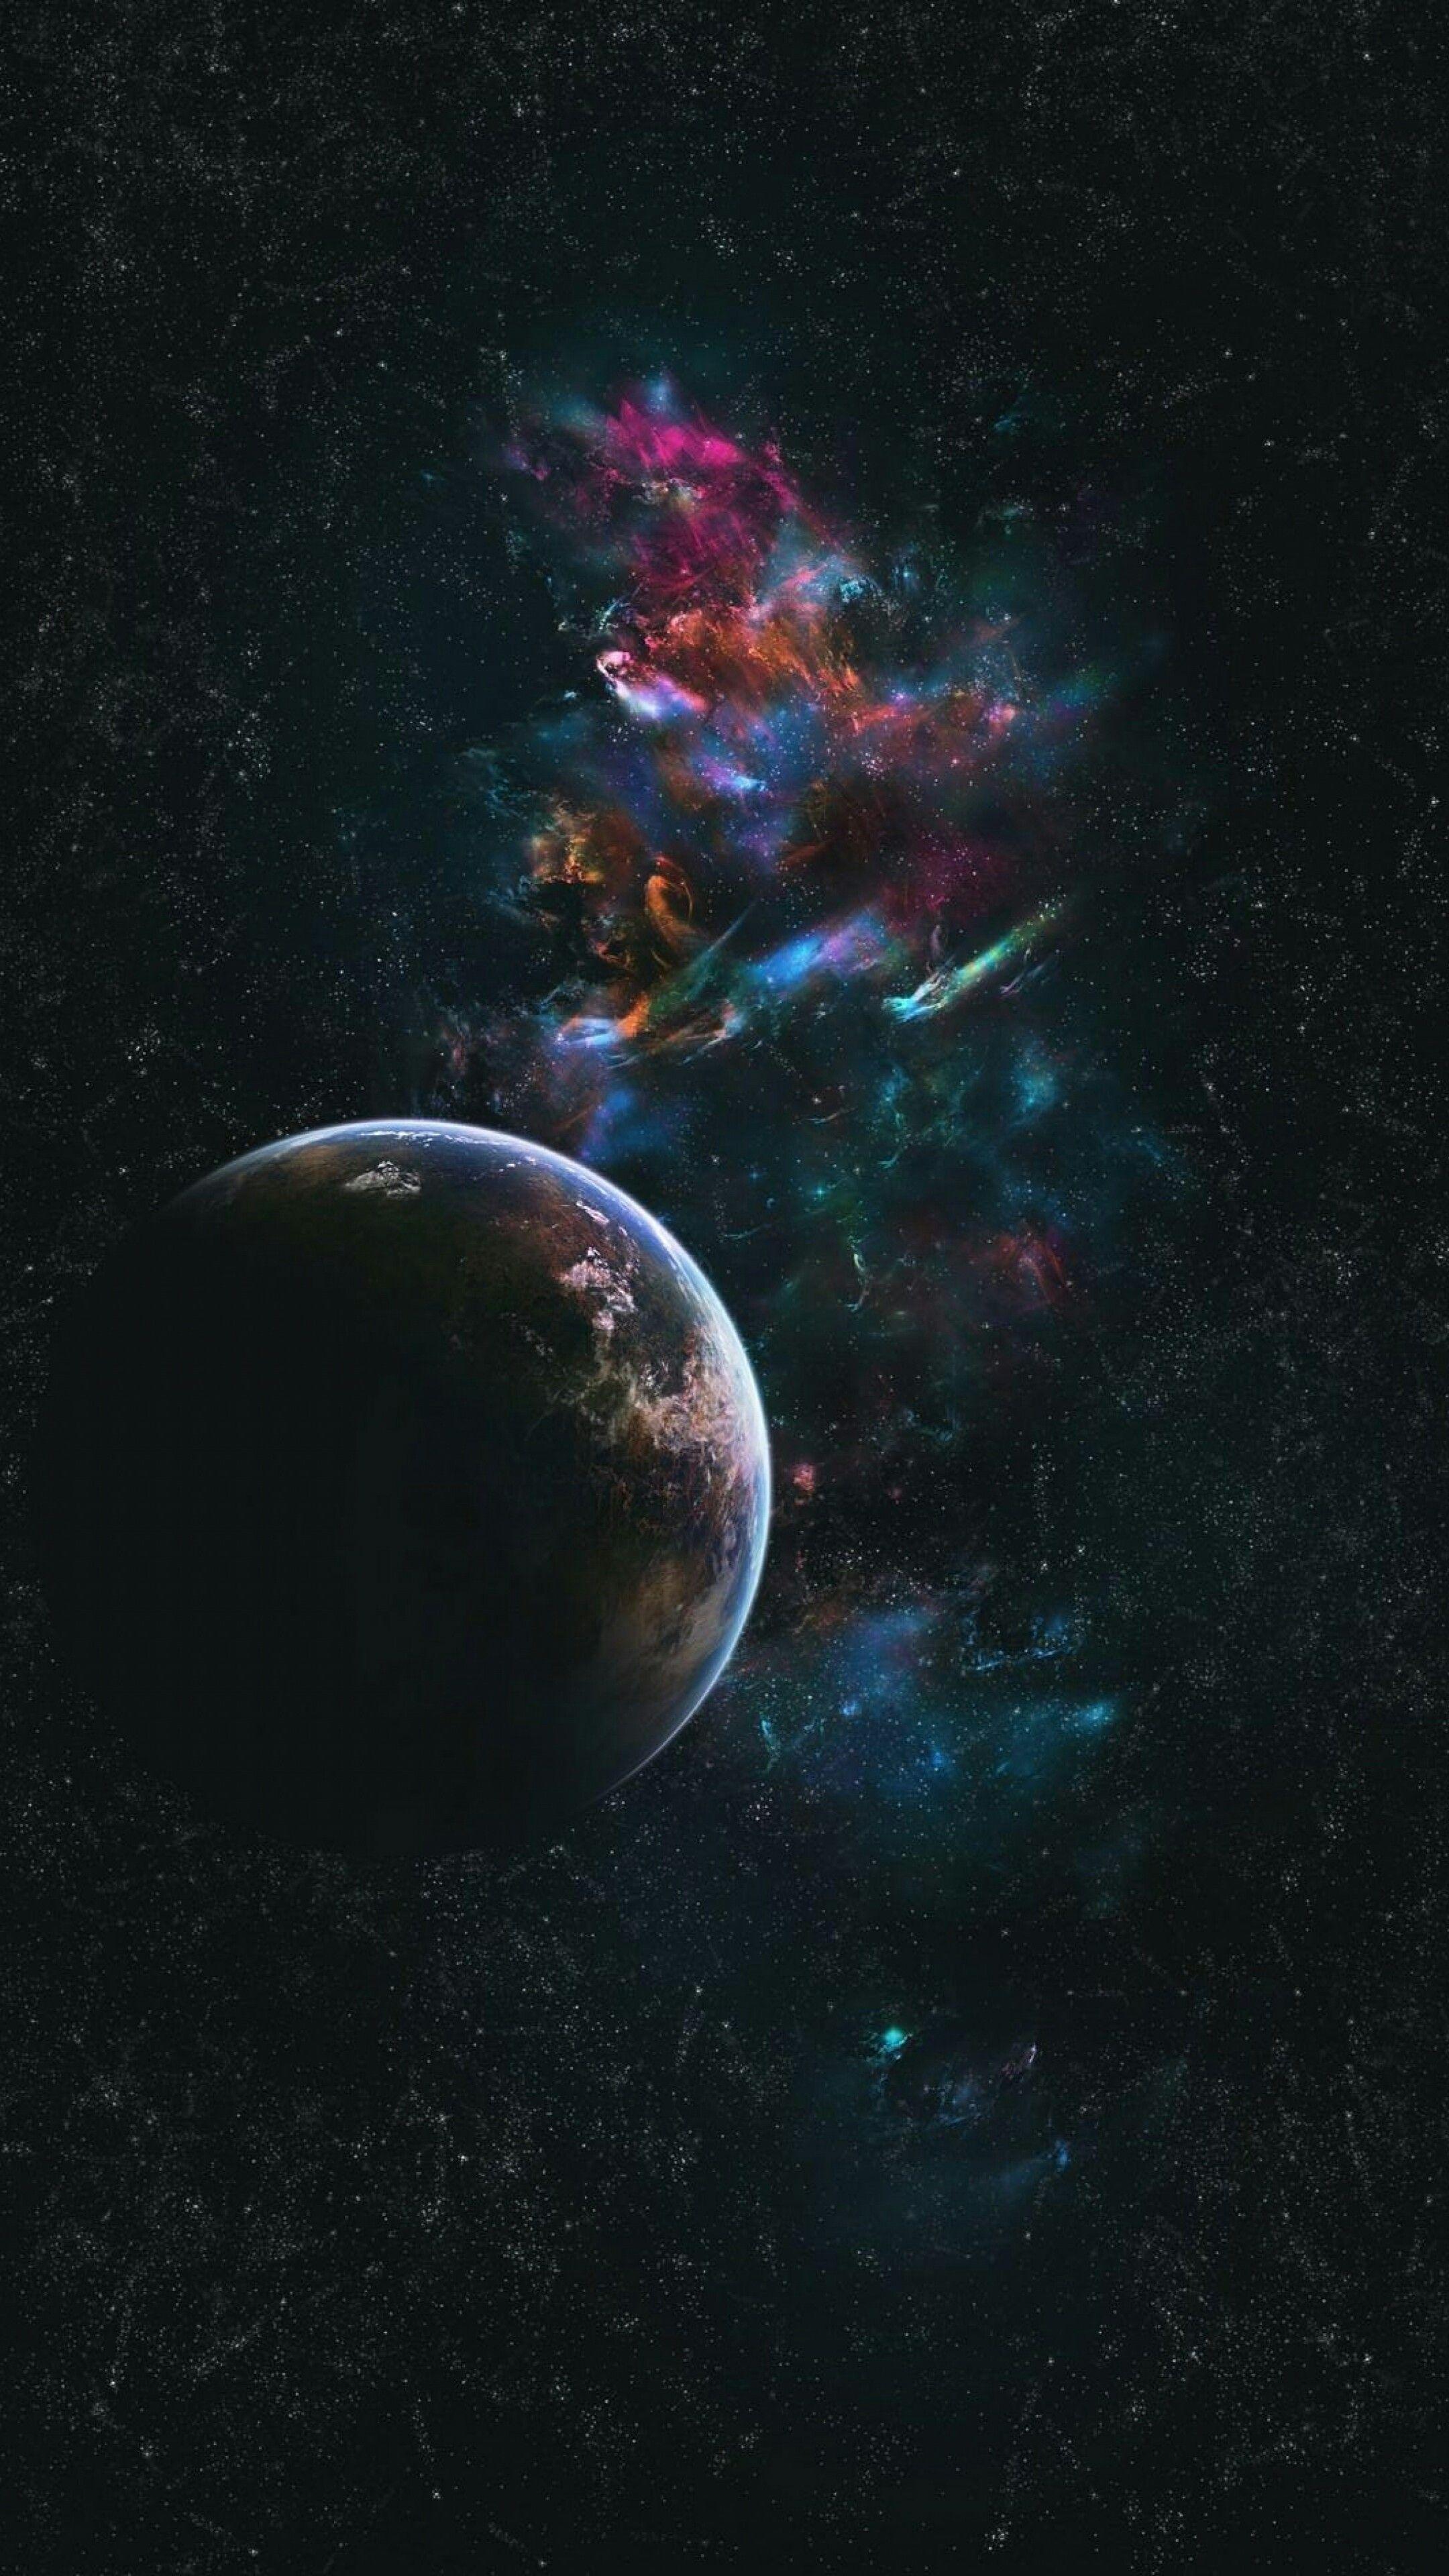 moving wallpaper for iphone latest. Moving wallpaper, Space